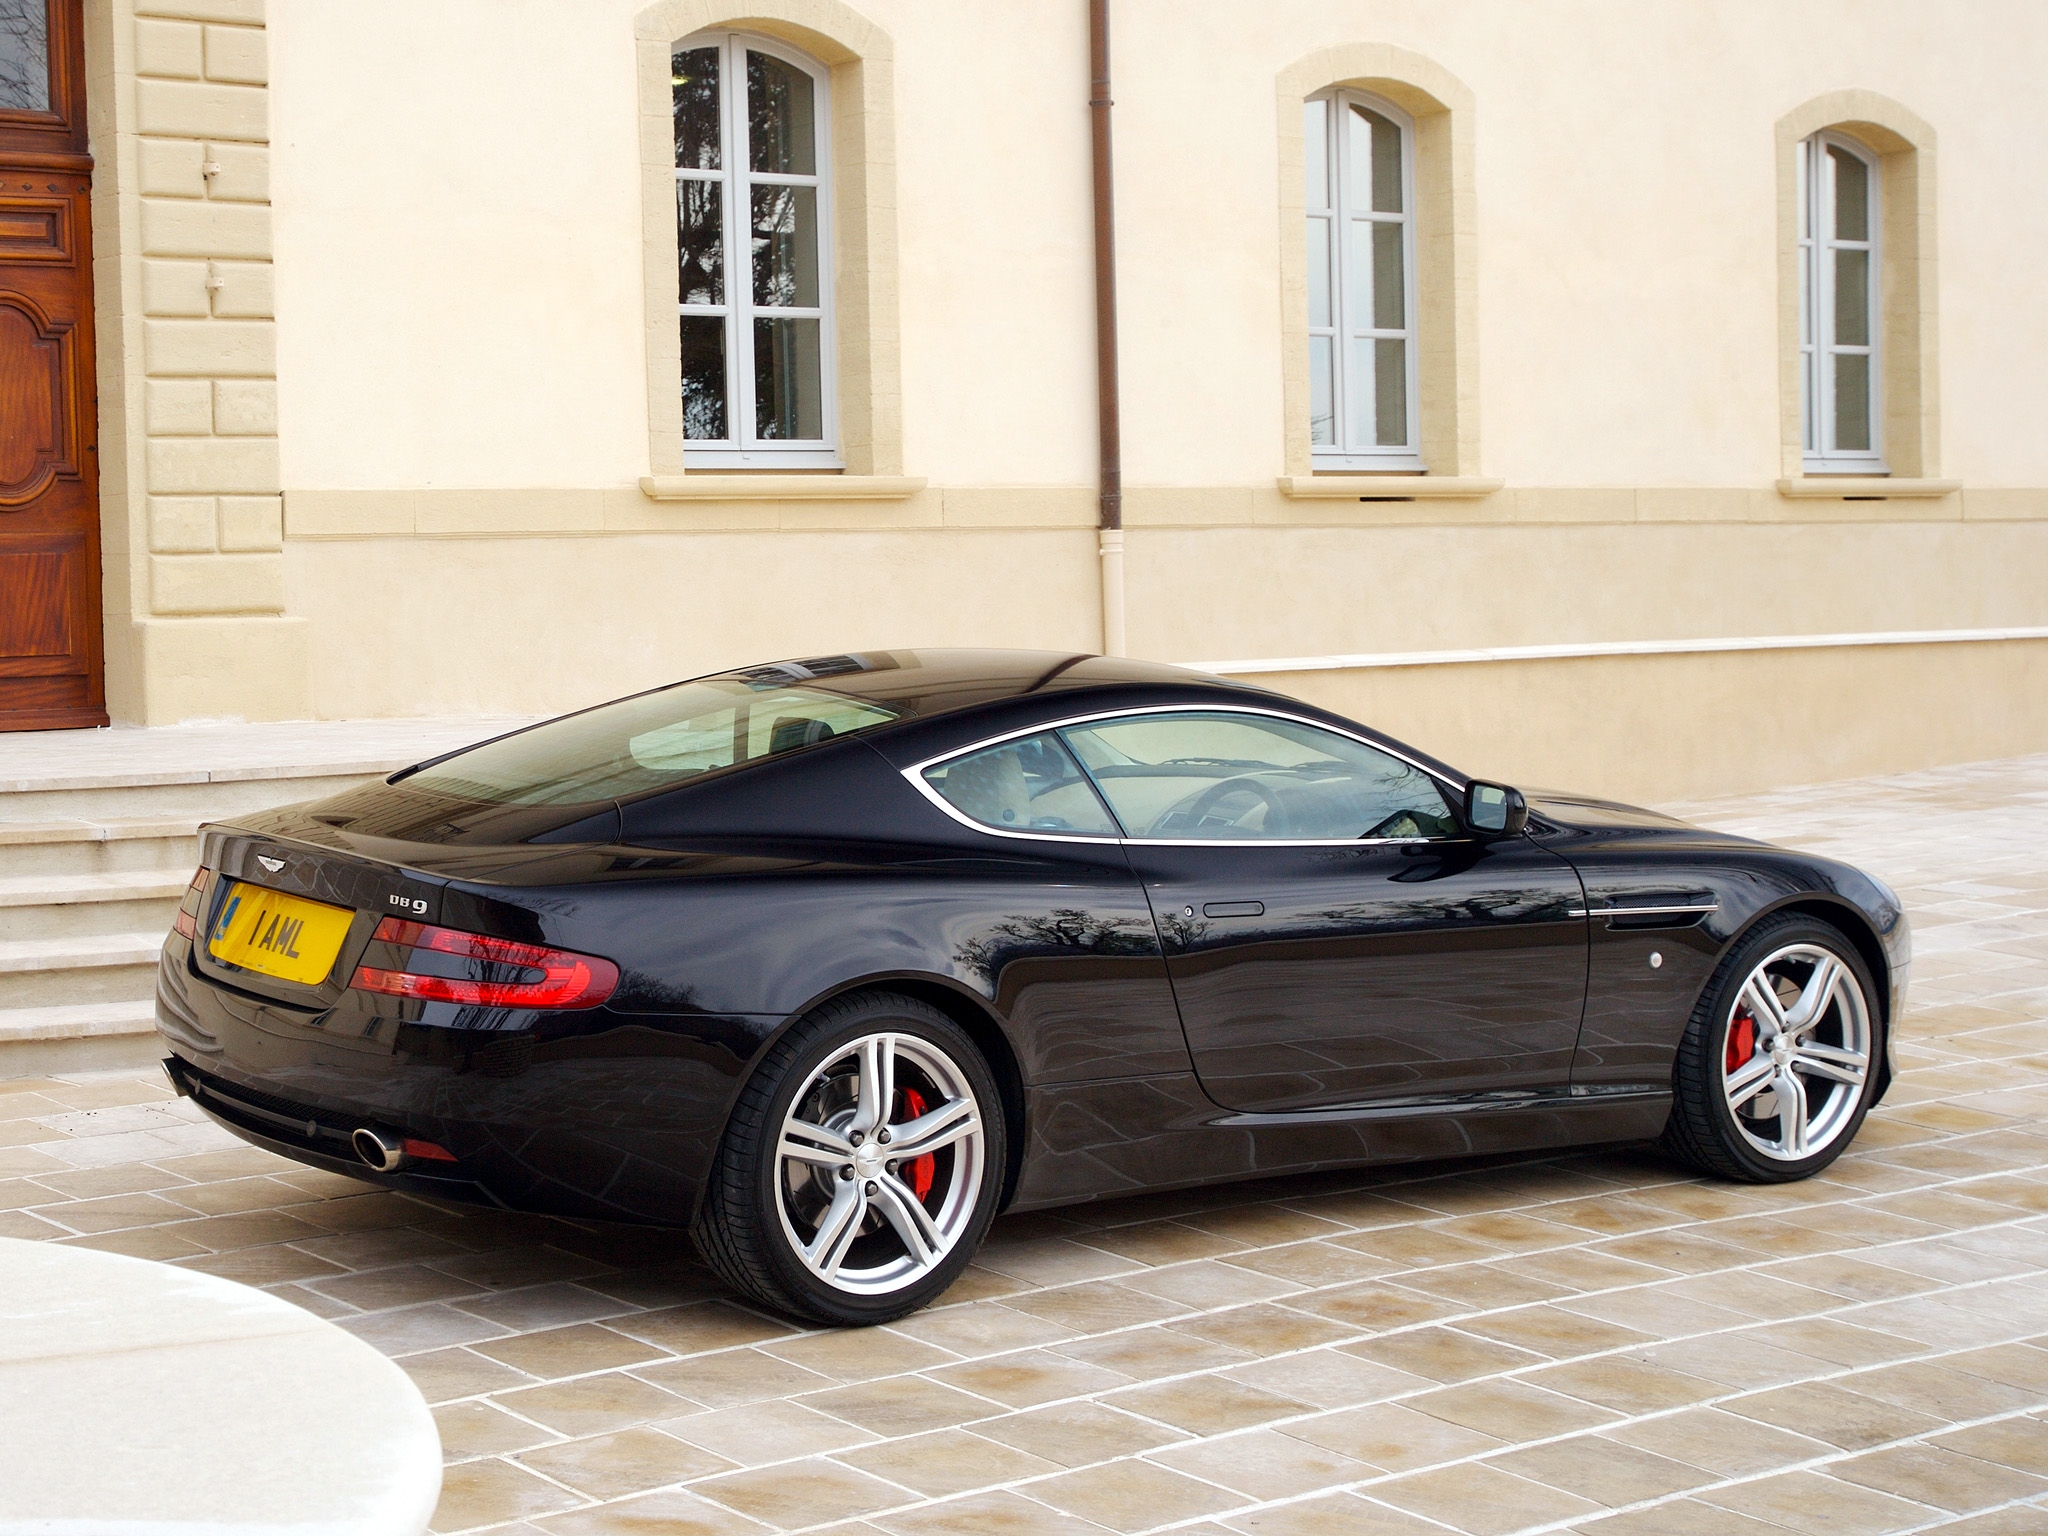 58830 download wallpaper sports, auto, aston martin, cars, black, building, side view, style, db9, 2006 screensavers and pictures for free